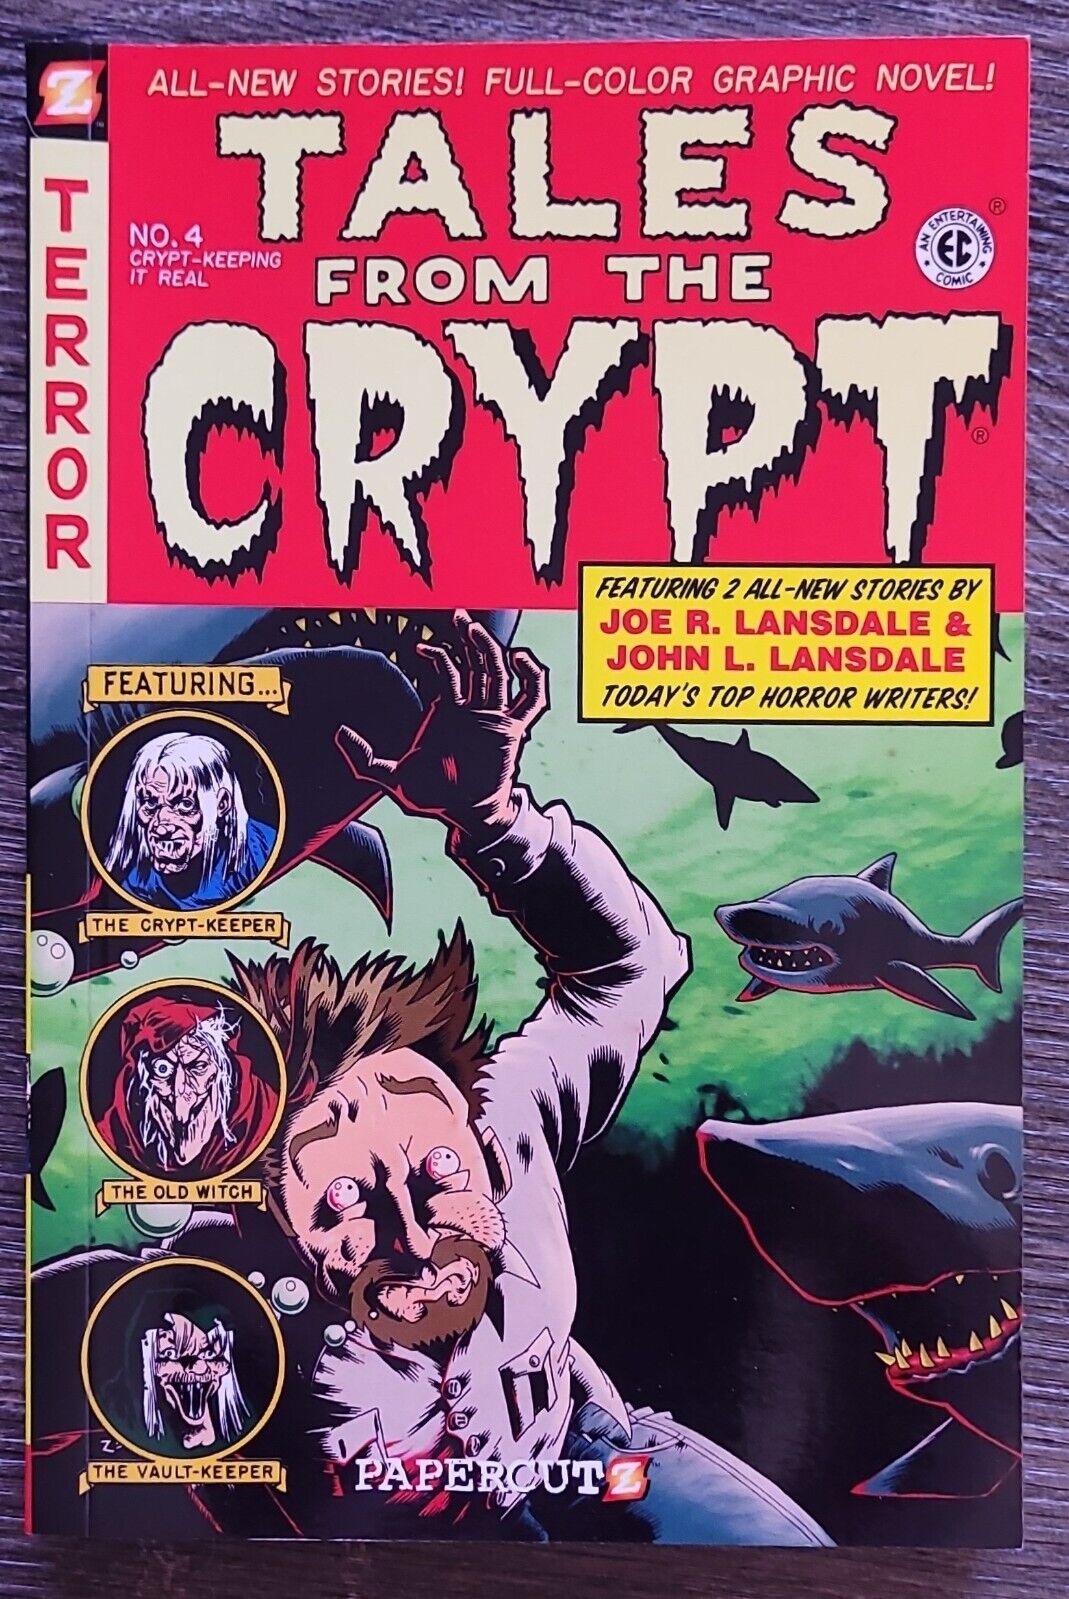 TALES FROM THE CRYPT #4  PAPERCUTZ GN COMIC 1ST PRINT LANSDALE 2008 NM